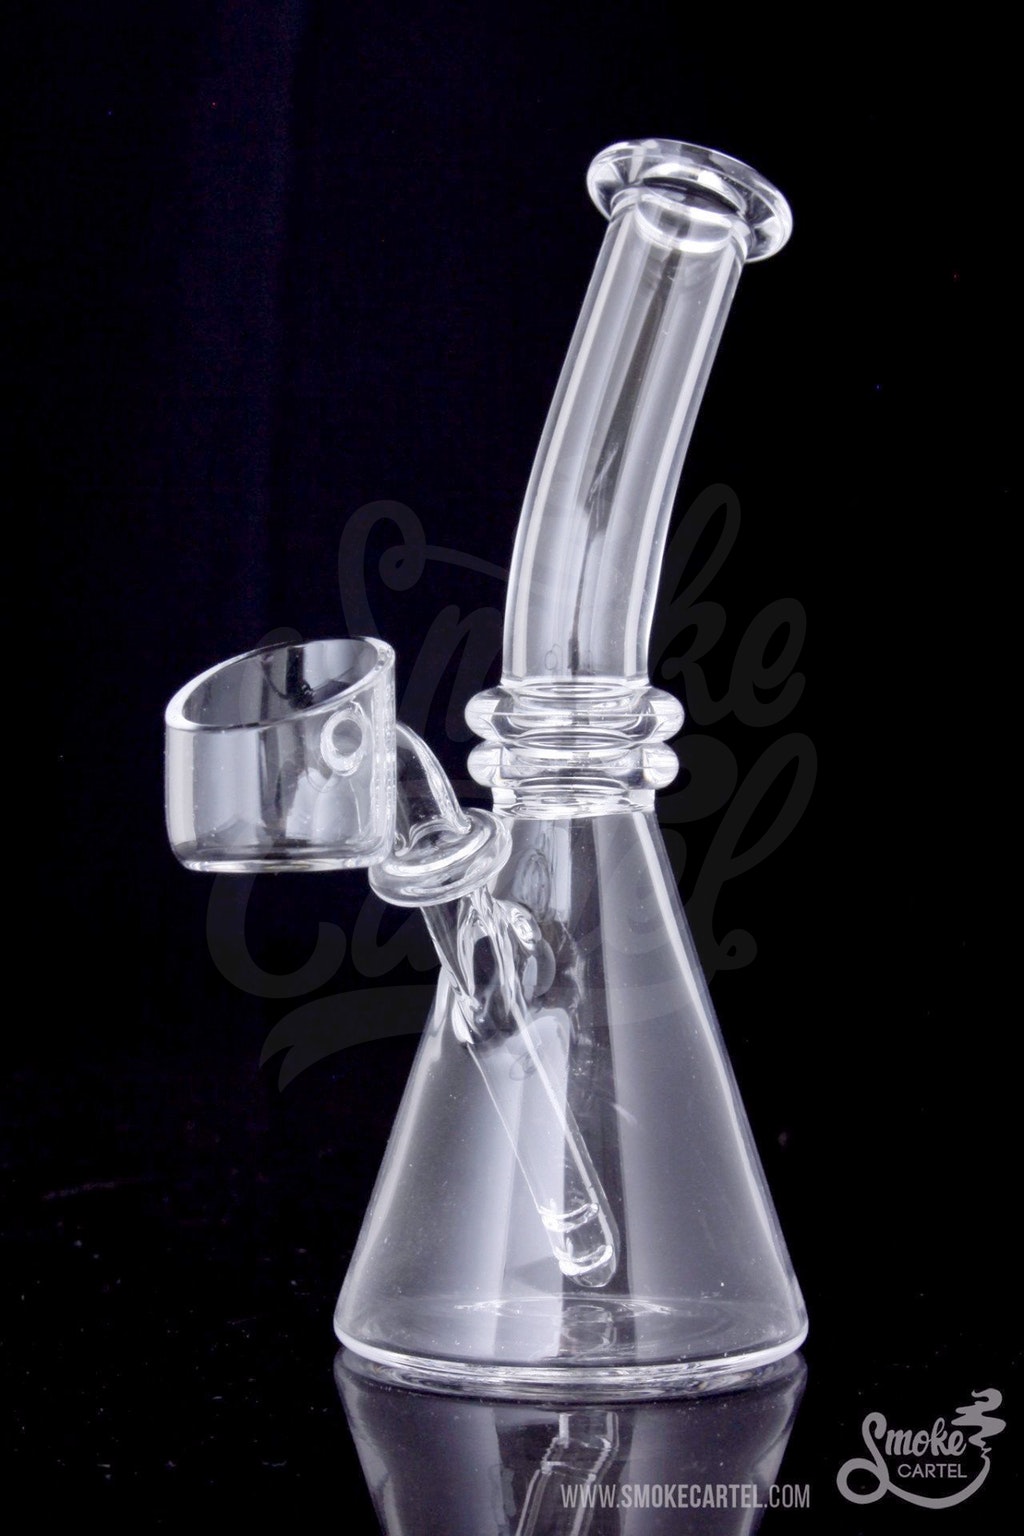 Treat Yourself to One Of Our Cool Bongs For Sale...